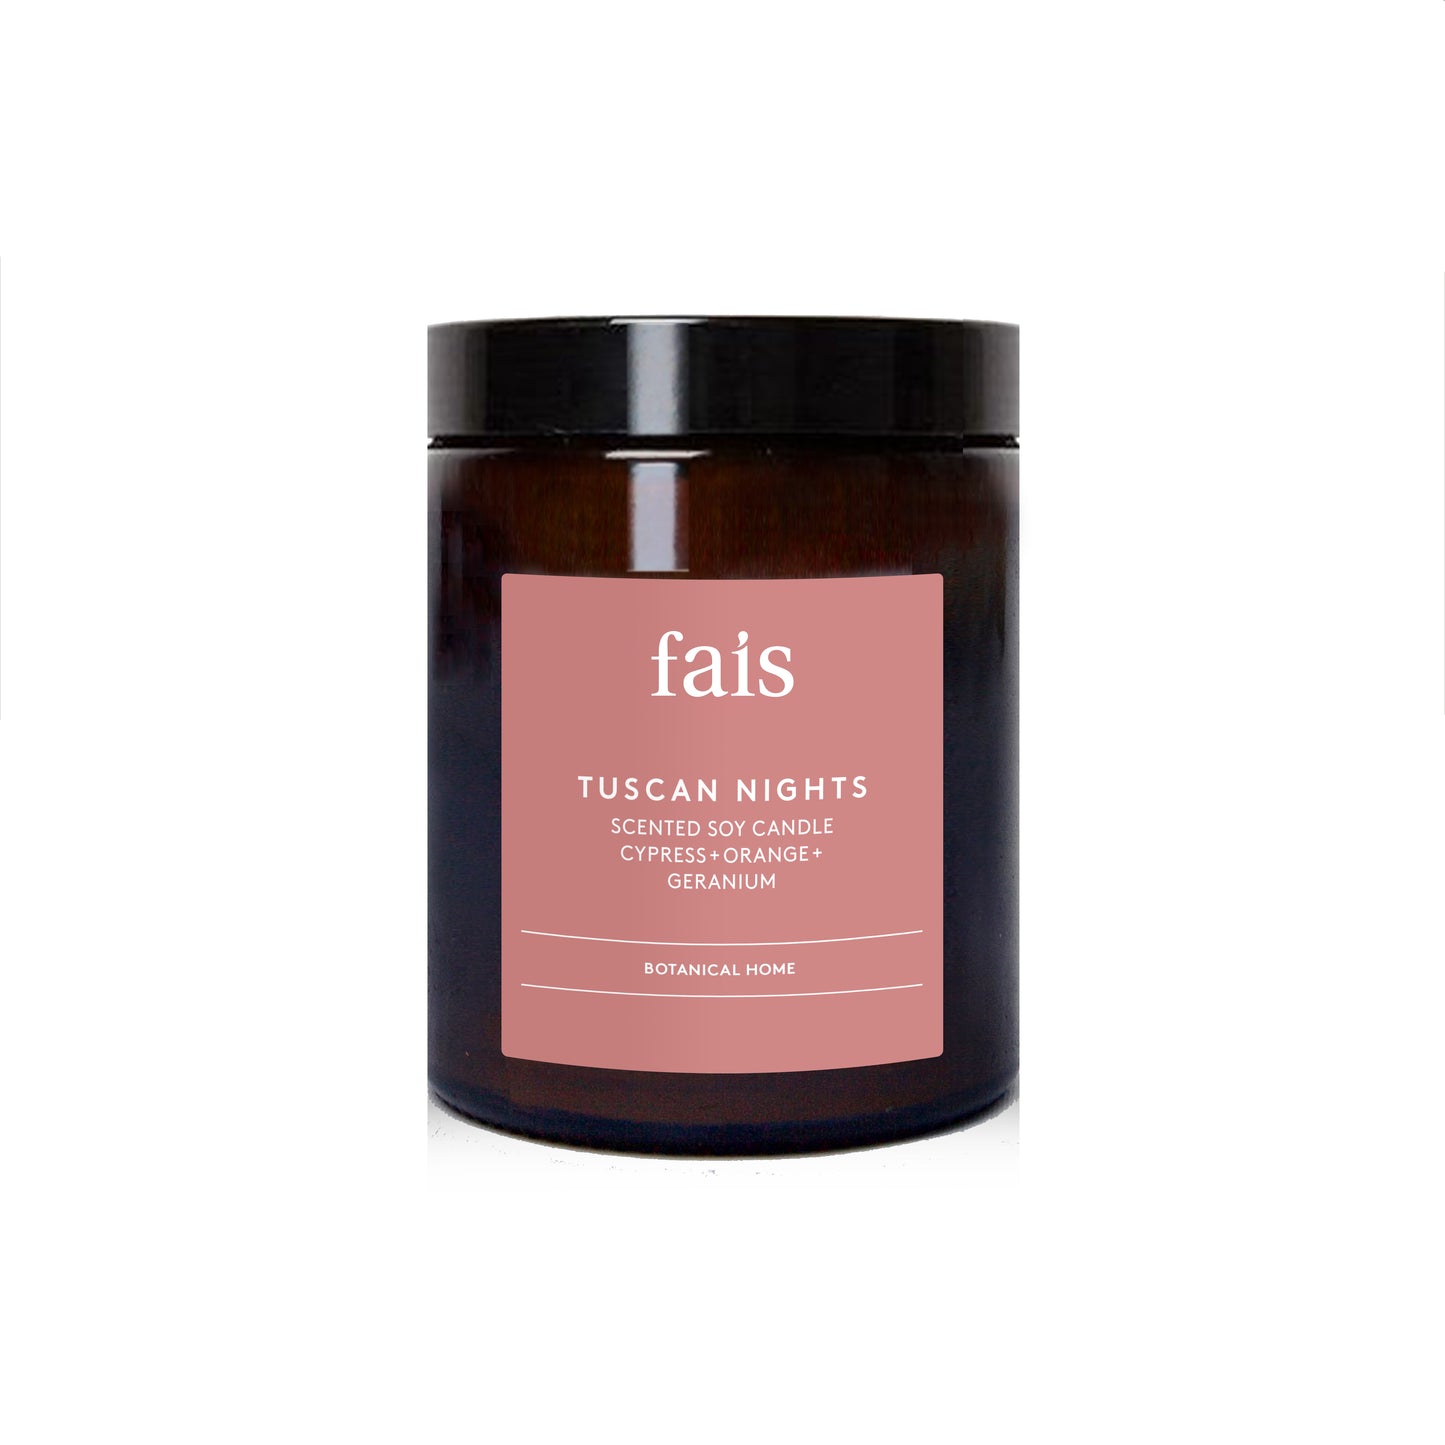 Tuscan Nights Scented Soy Candle Cypress + Orange + Geranium